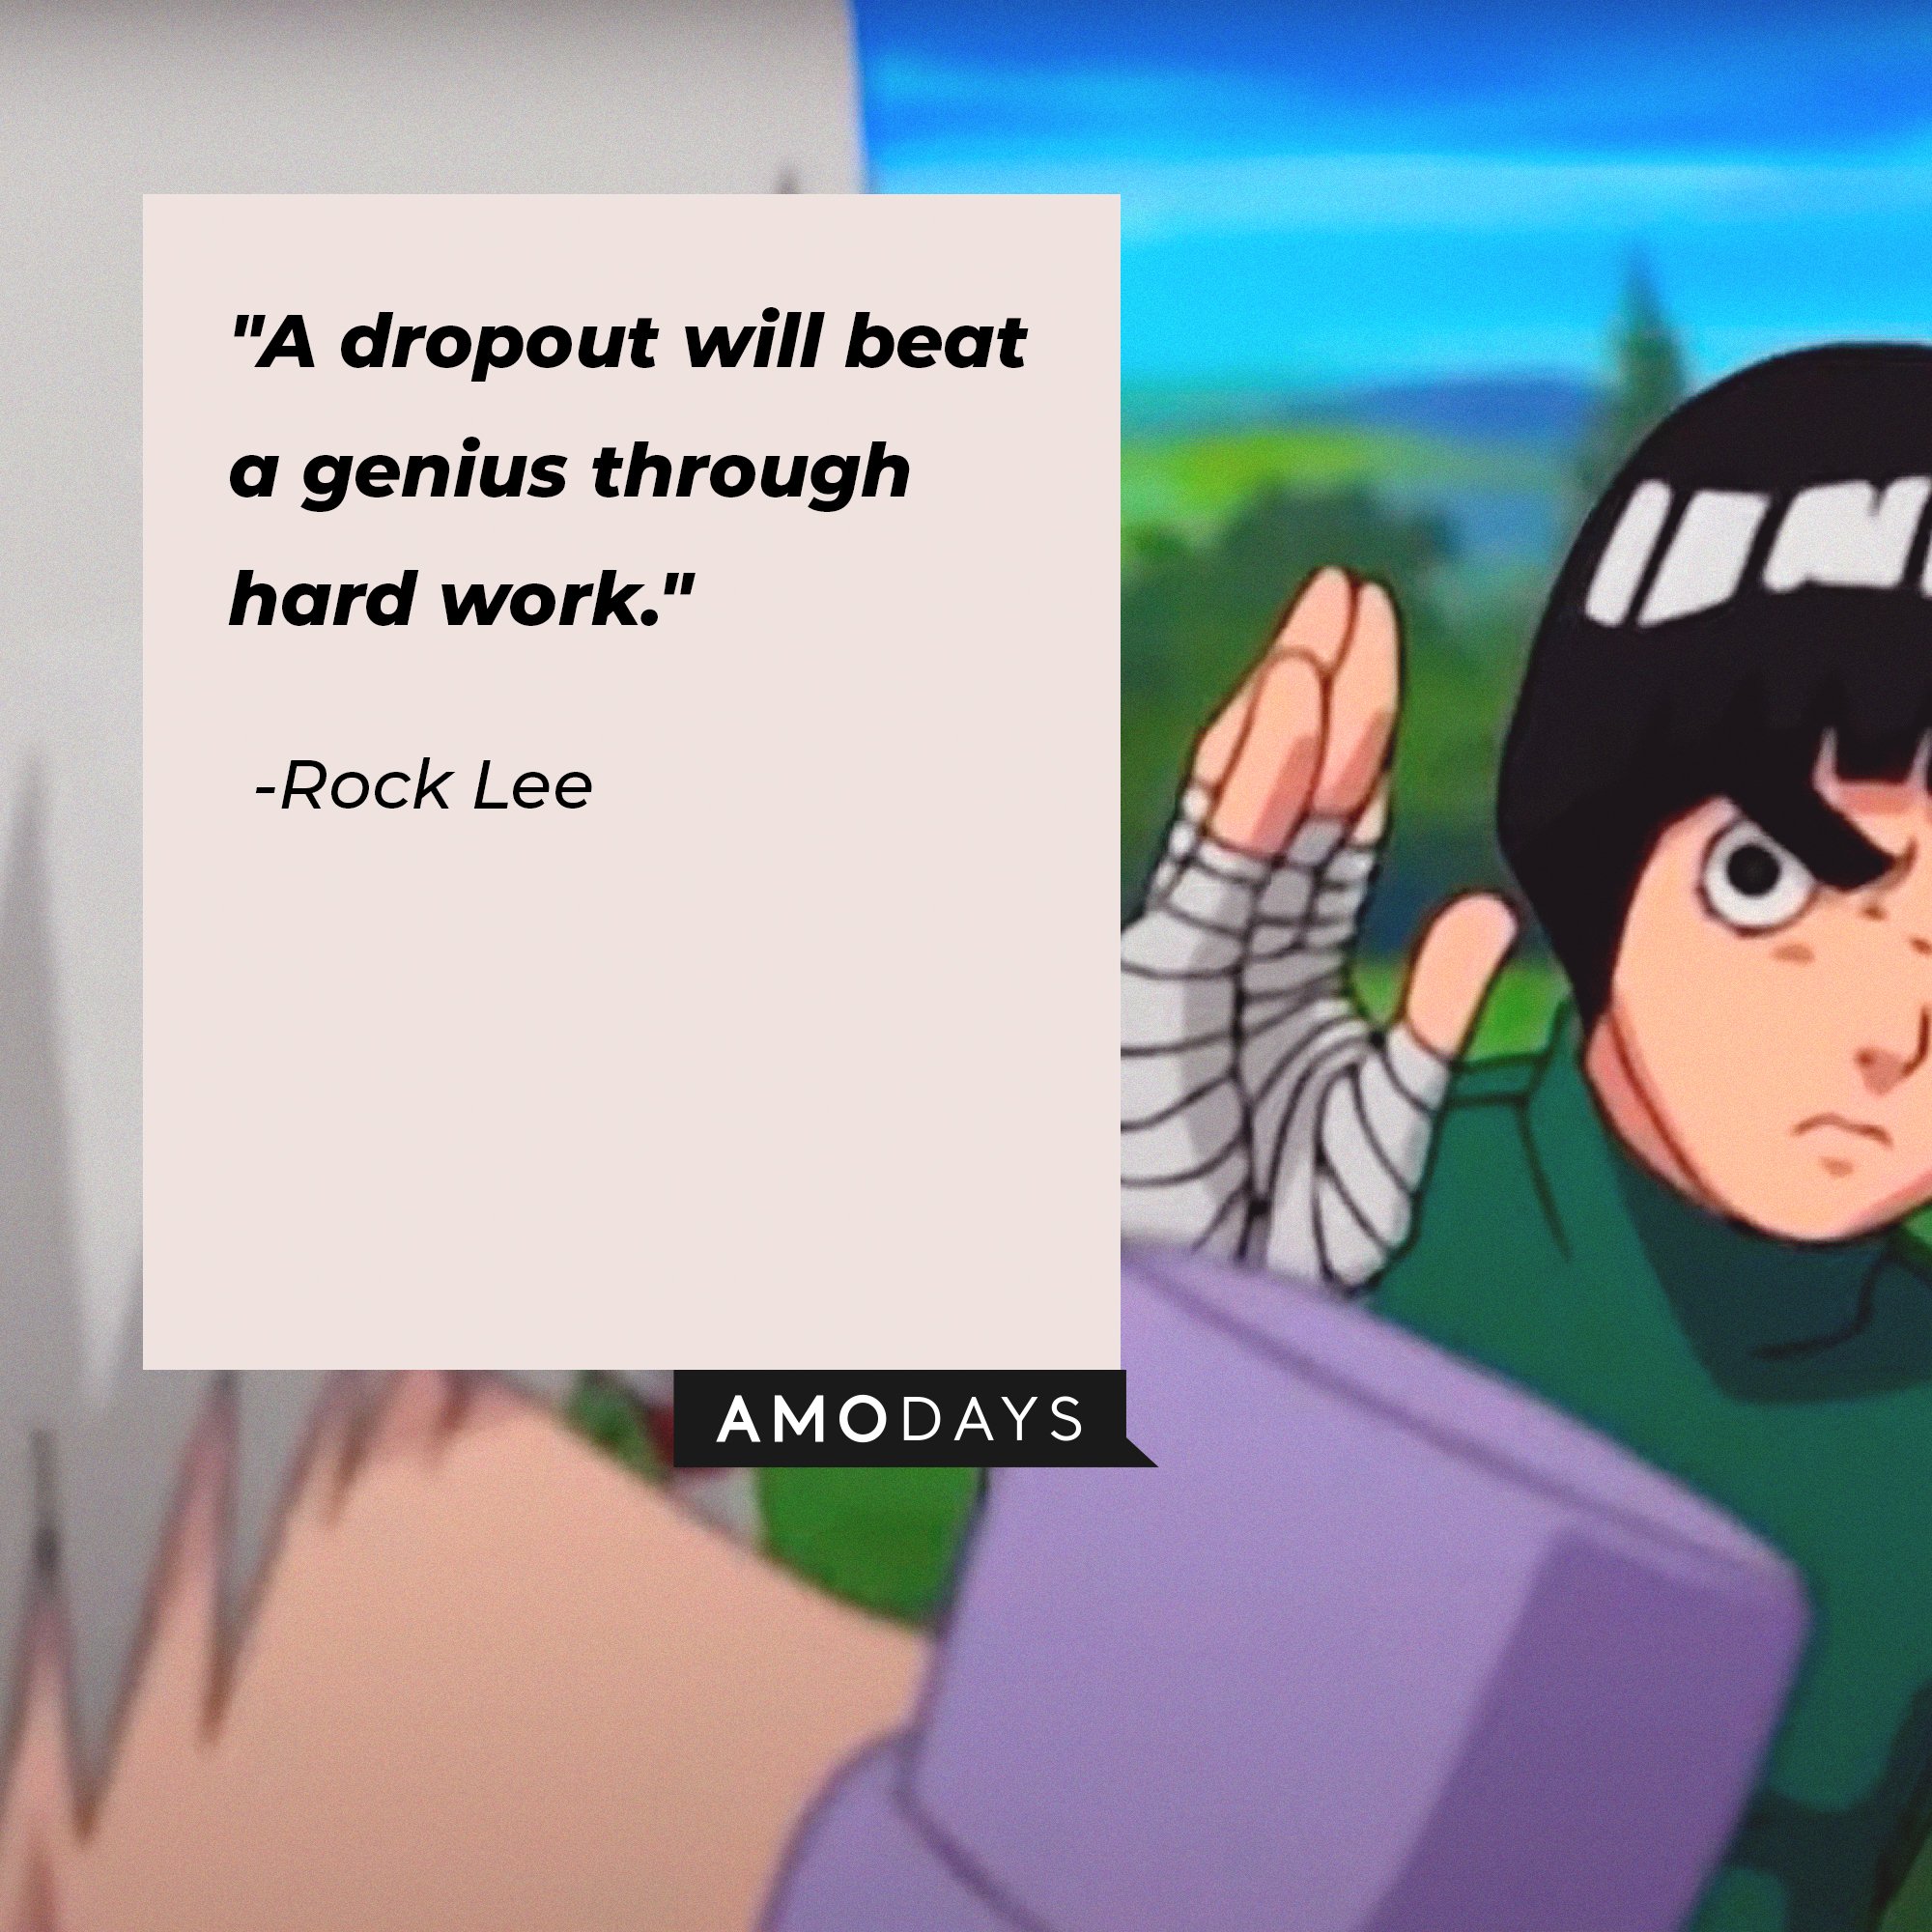 Rock Lee's quote: "A dropout will beat a genius through hard work." | Image: AmoDays